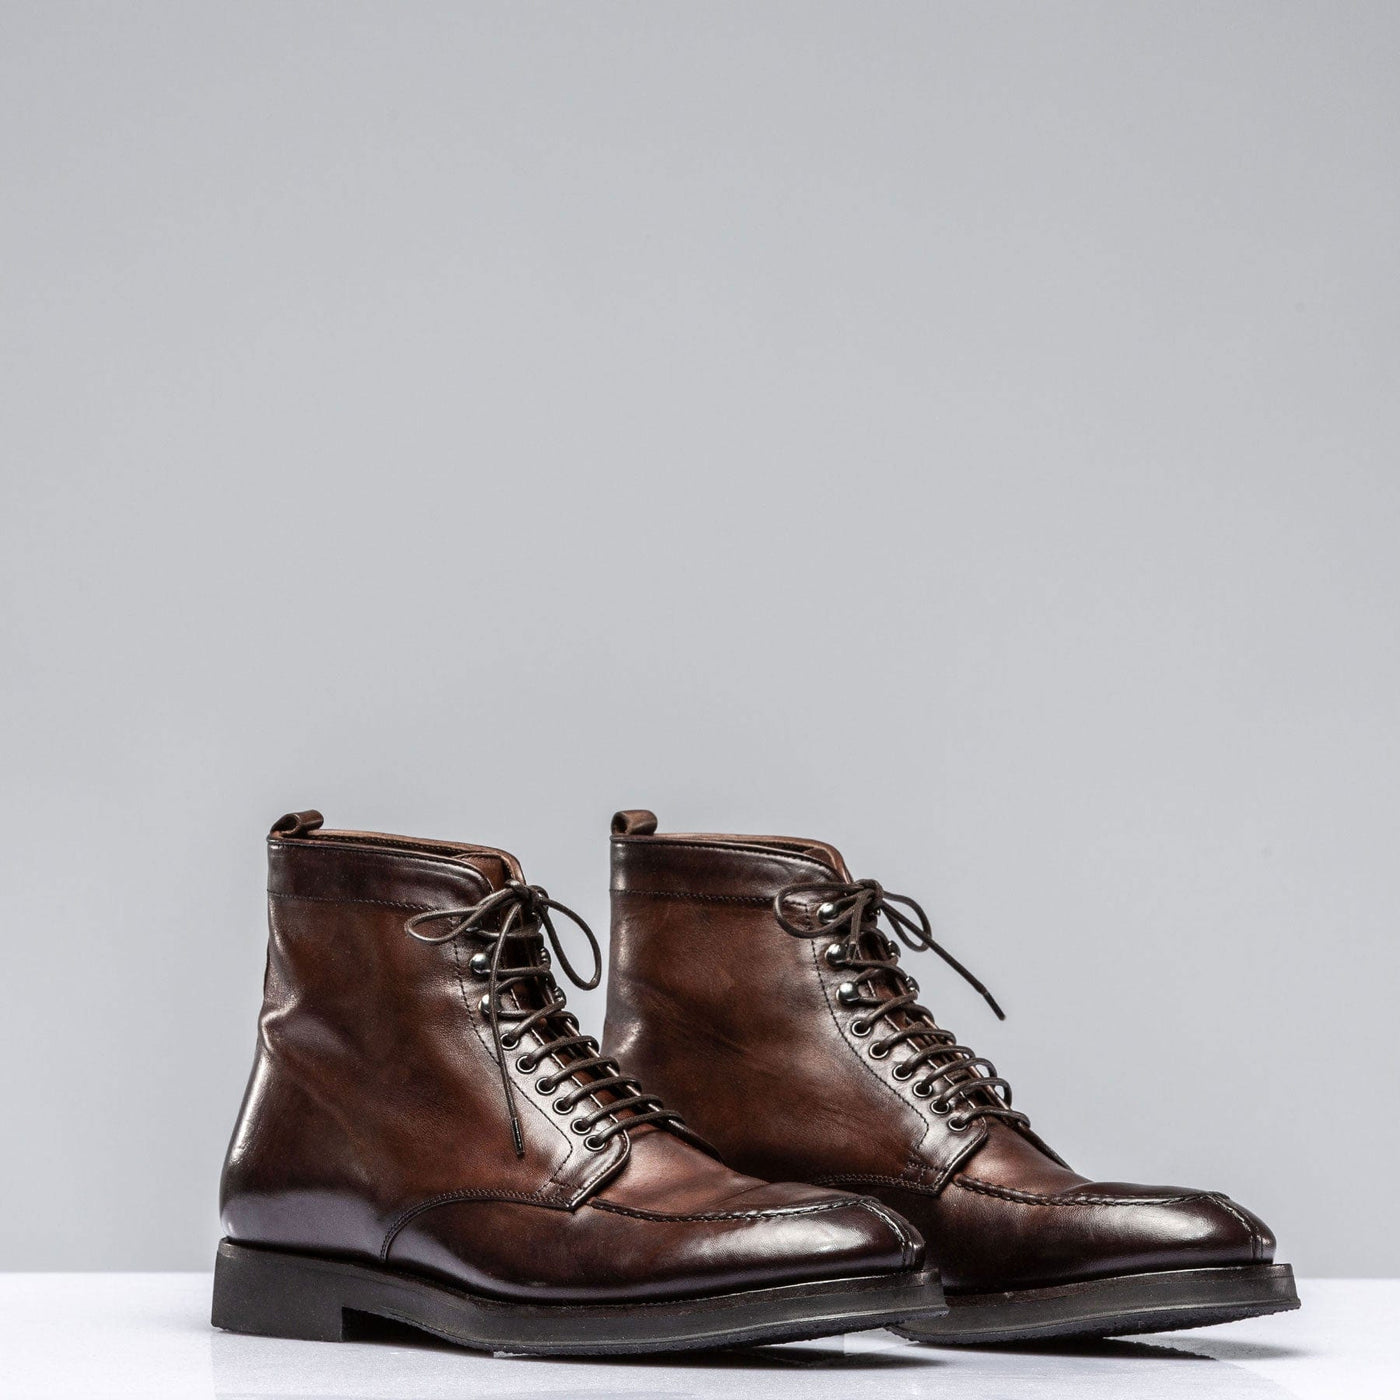 Alpina Boot In Washed Mogano - AXEL'S